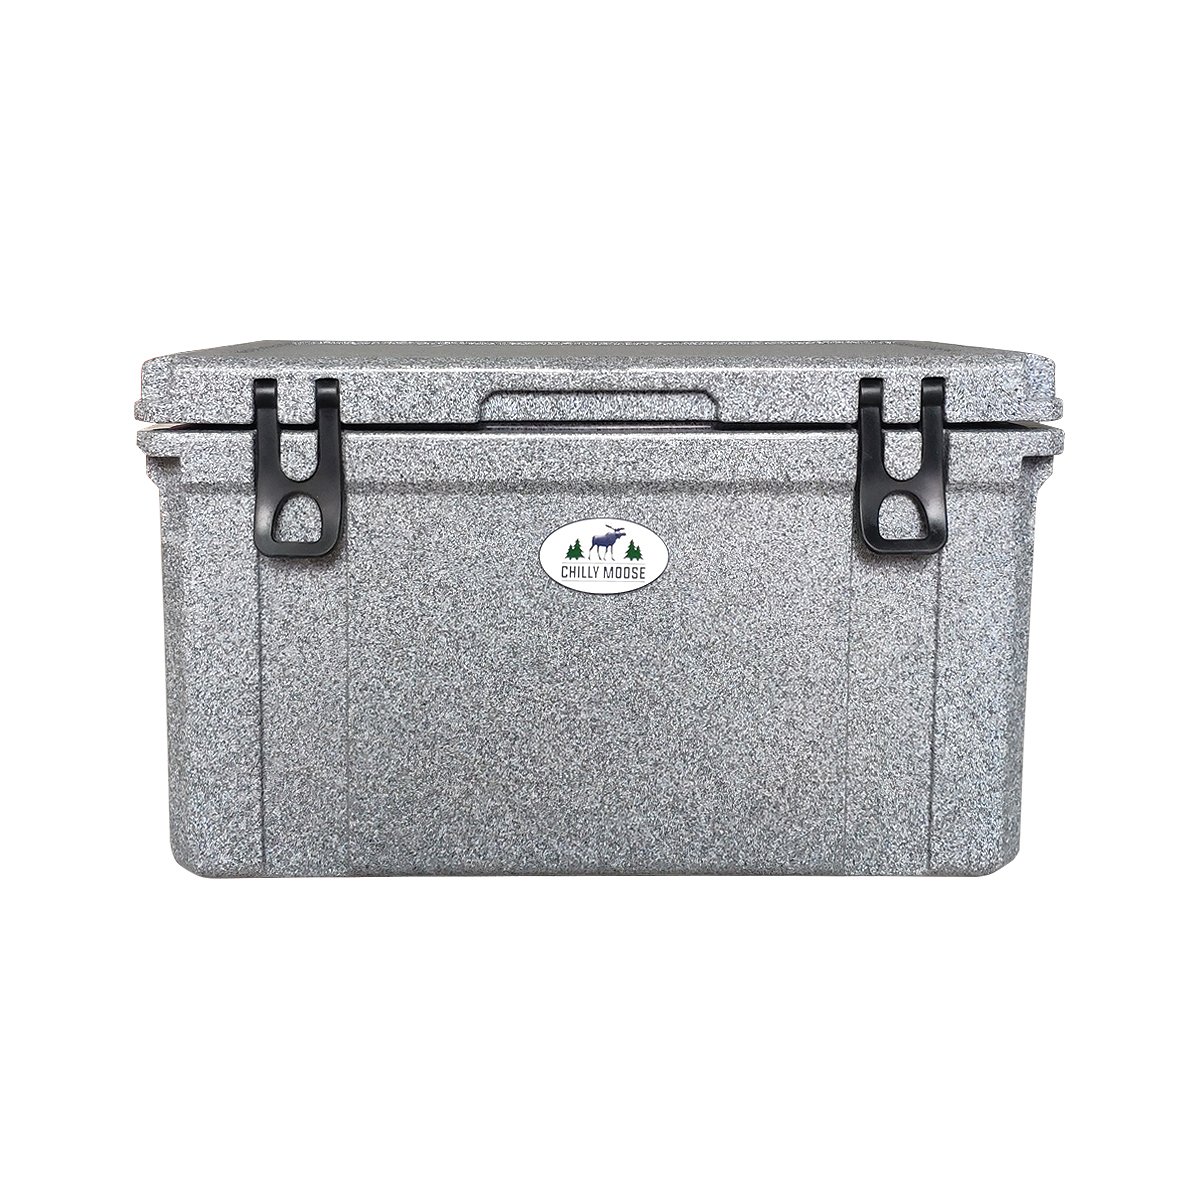 55 LTR CHILLY ICE BOX COOLER MOONSTONE